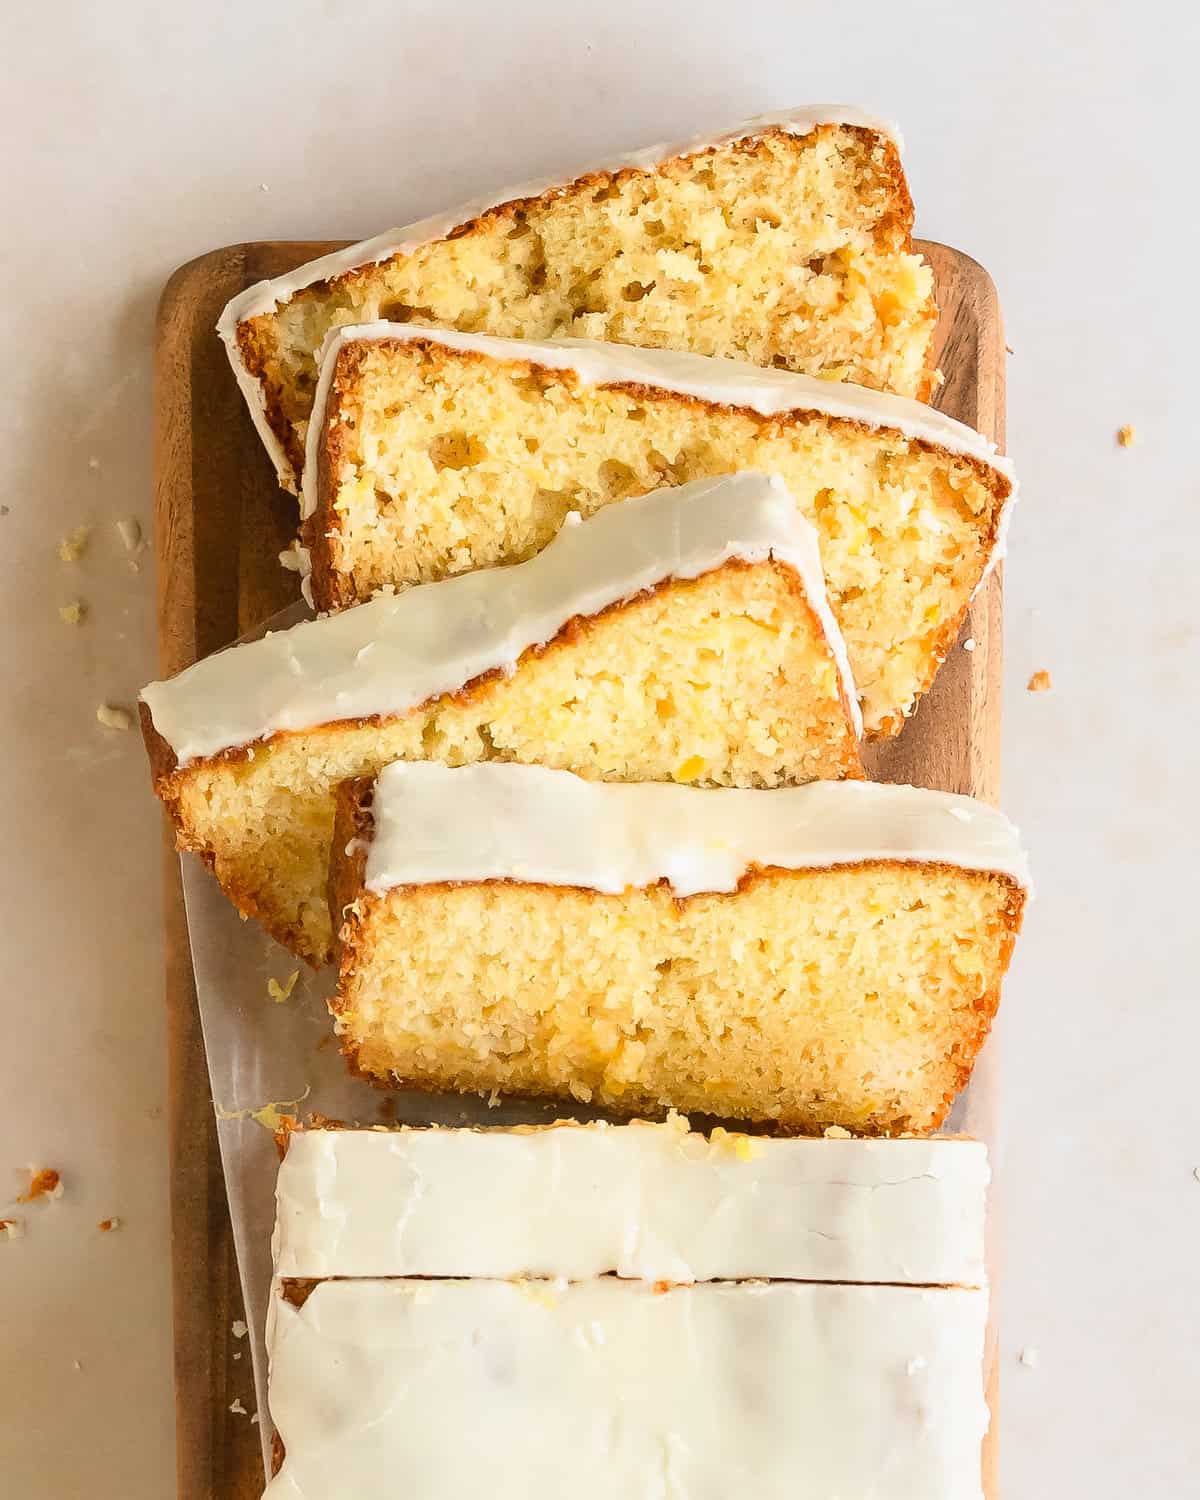 Pineapple bread is a soft, moist and buttery pineapple quick bread filled with crushed pineapple. This easy to make pineapple loaf cake is topped with a sweet pineapple glaze for even more fresh tropical flavor.